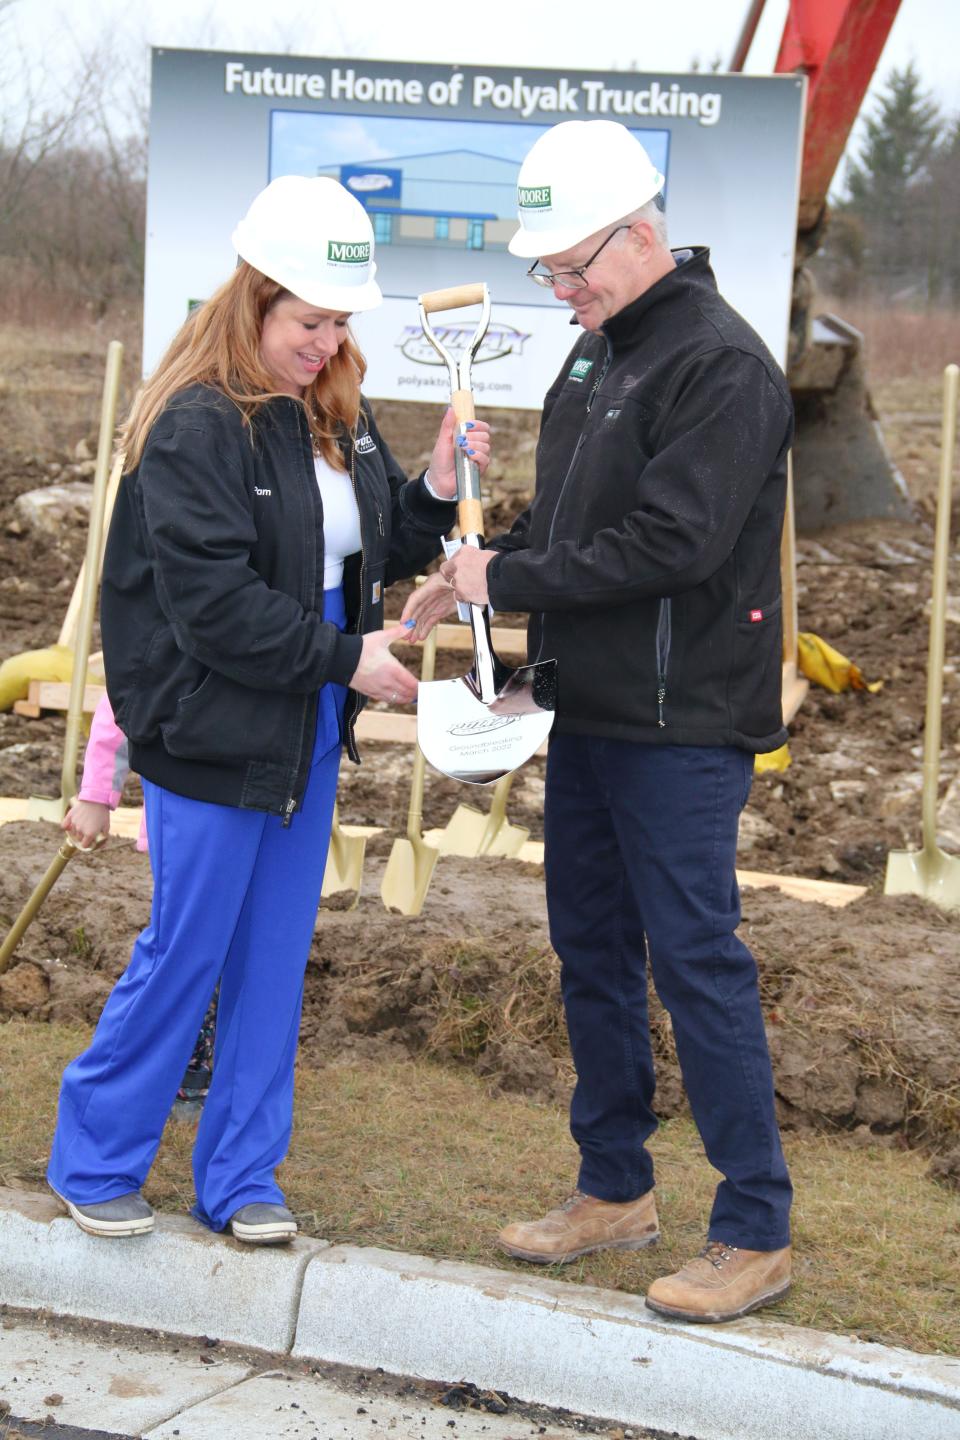 Pamela Polyak, owner of Polyak Trucking & Polyak Logistics, and Mike Moore, owner of Moore Construction Services, break ground for the new Polyak Trucking & Polyak Logistics building in the town of Lisbon.